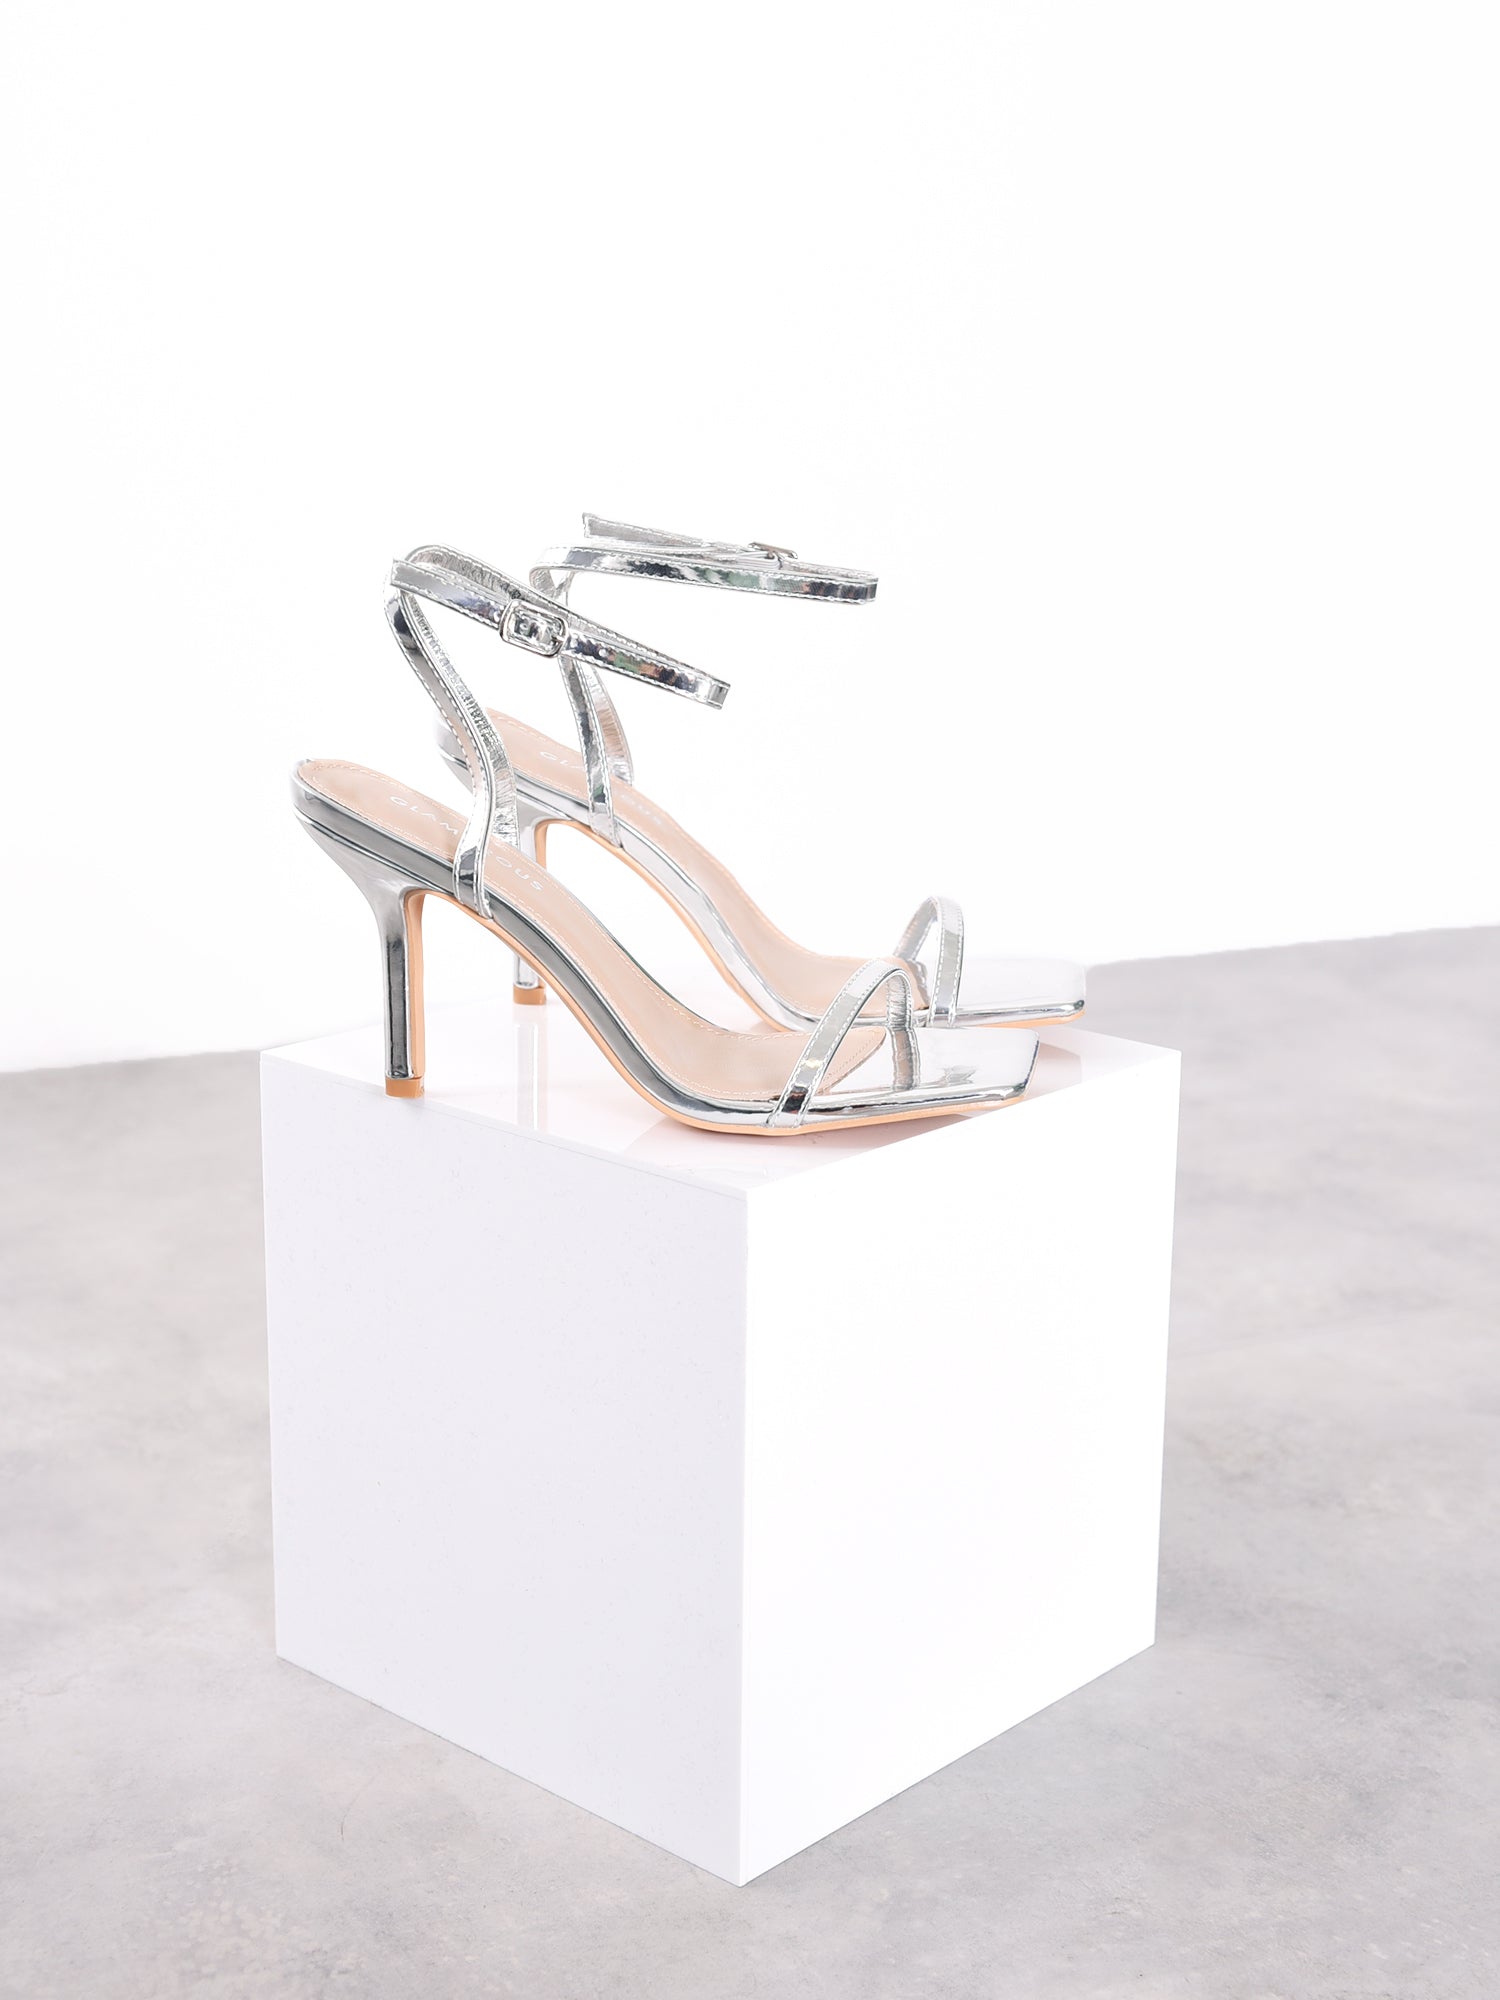 Silver Barely There Strappy Heels - Glamorous